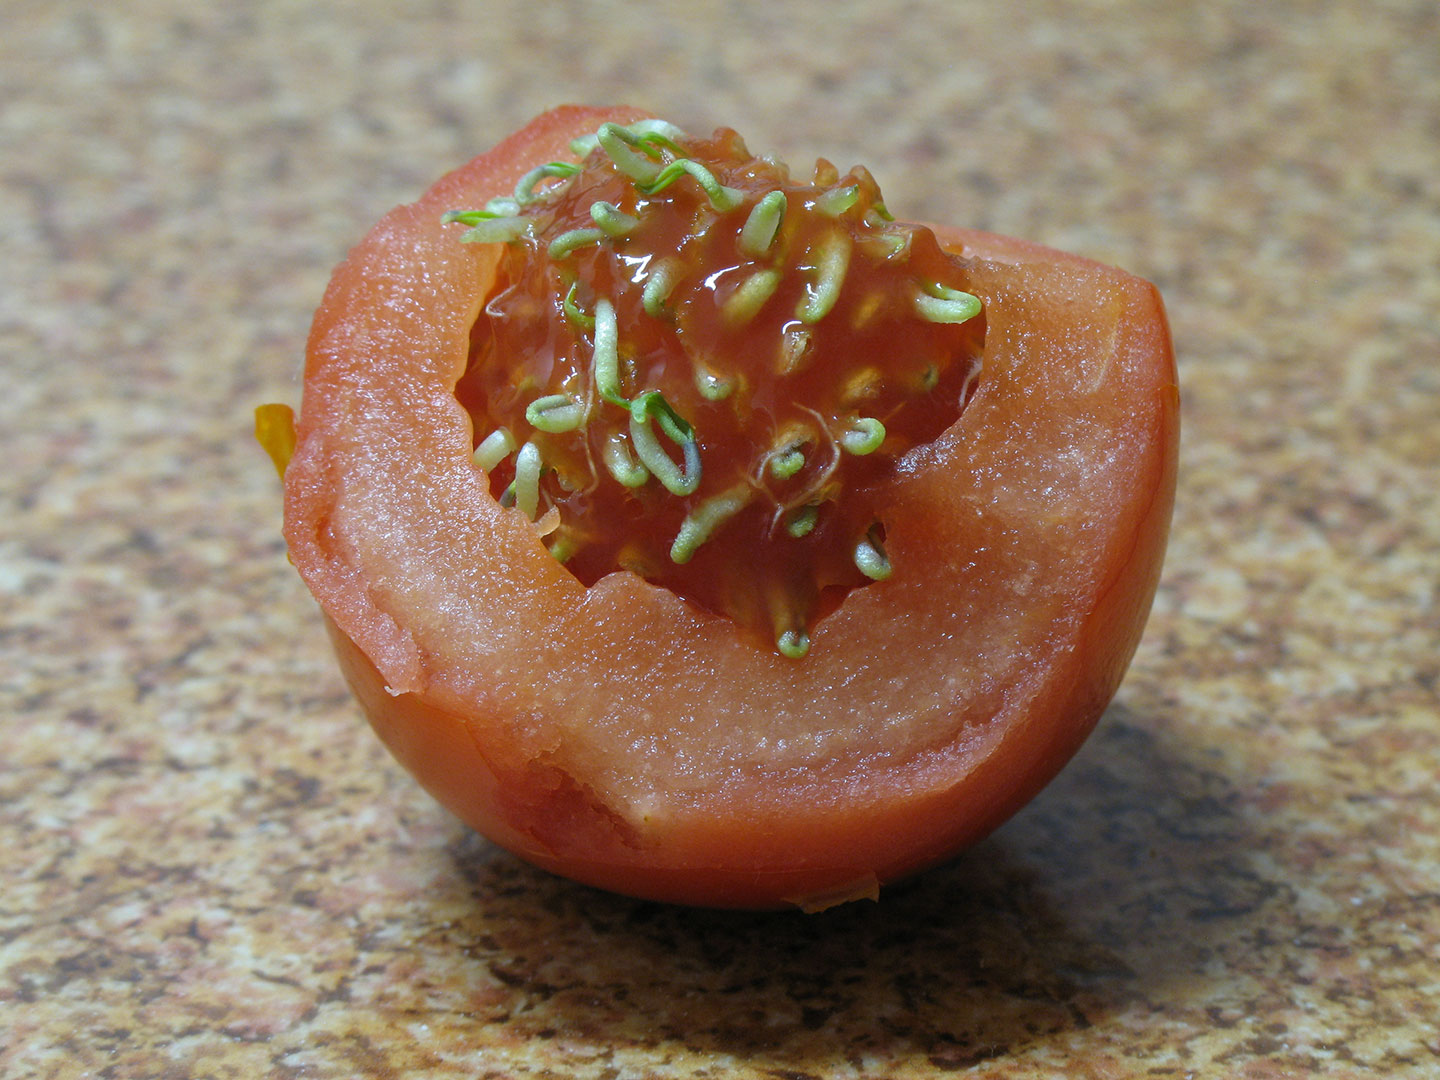 Tomato Seeds Prematurely Sprouting